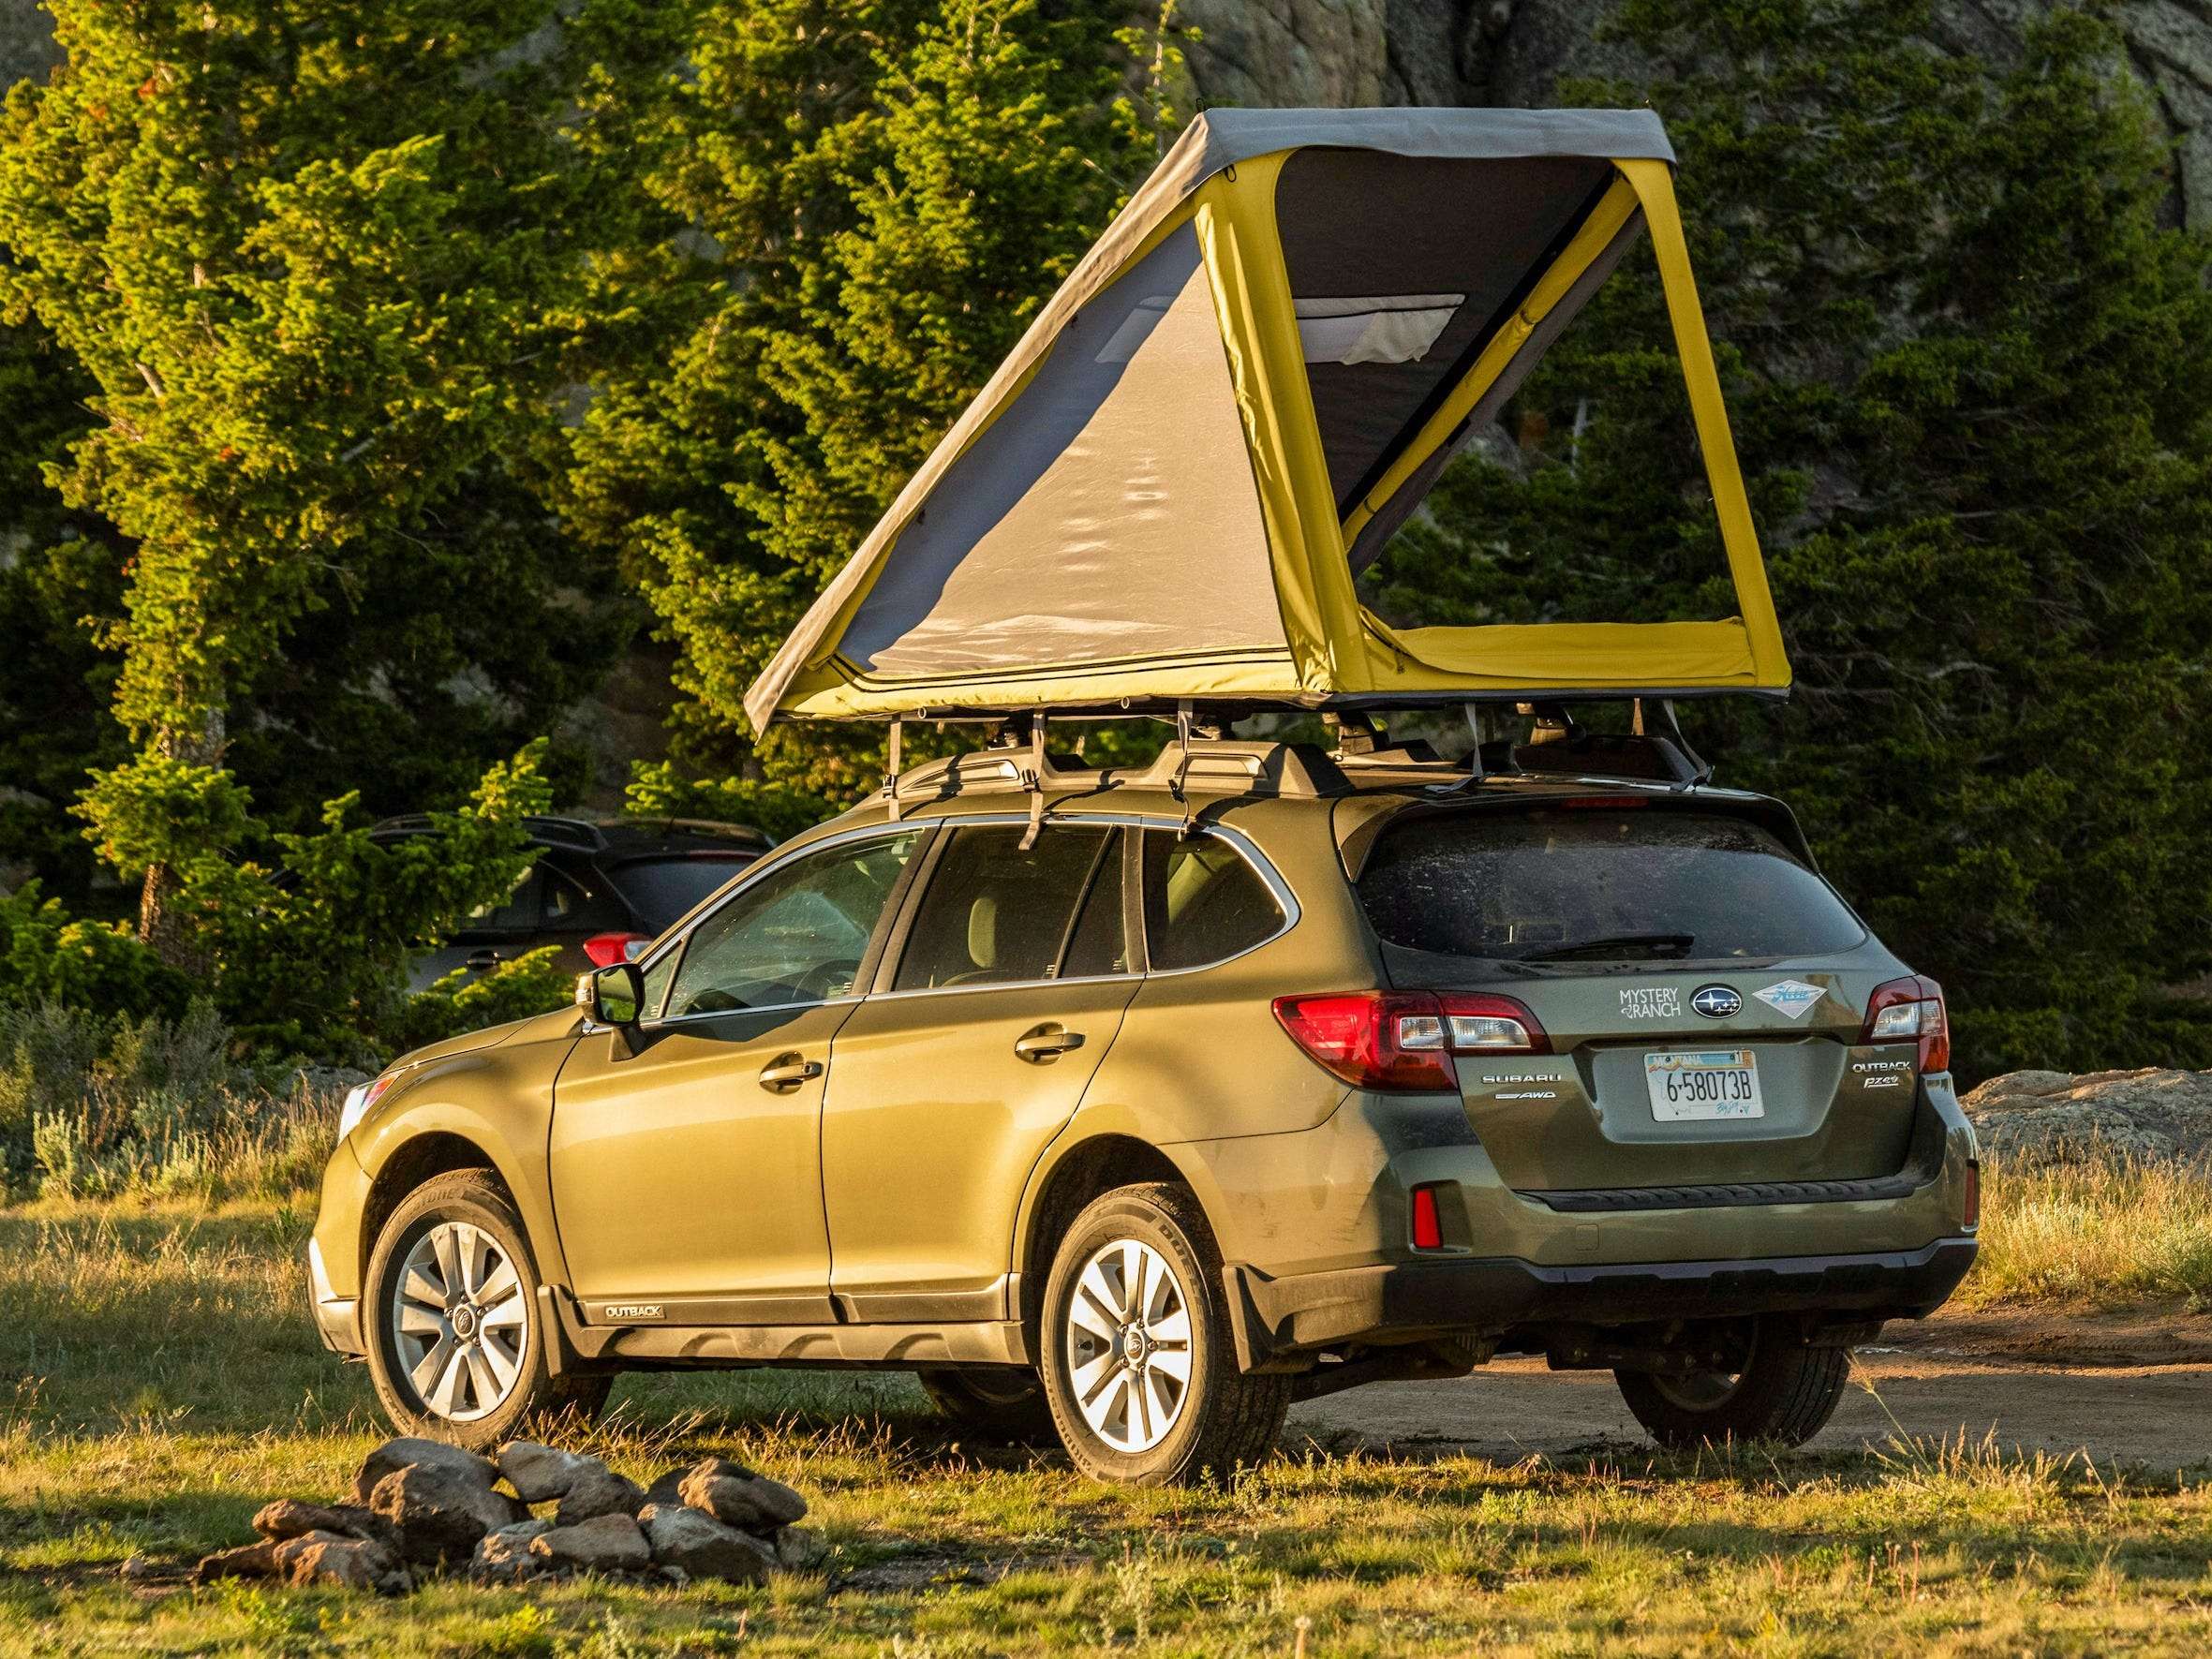 Go Fast Campers unveiled a 'minimalist' lightweight rooftop tent